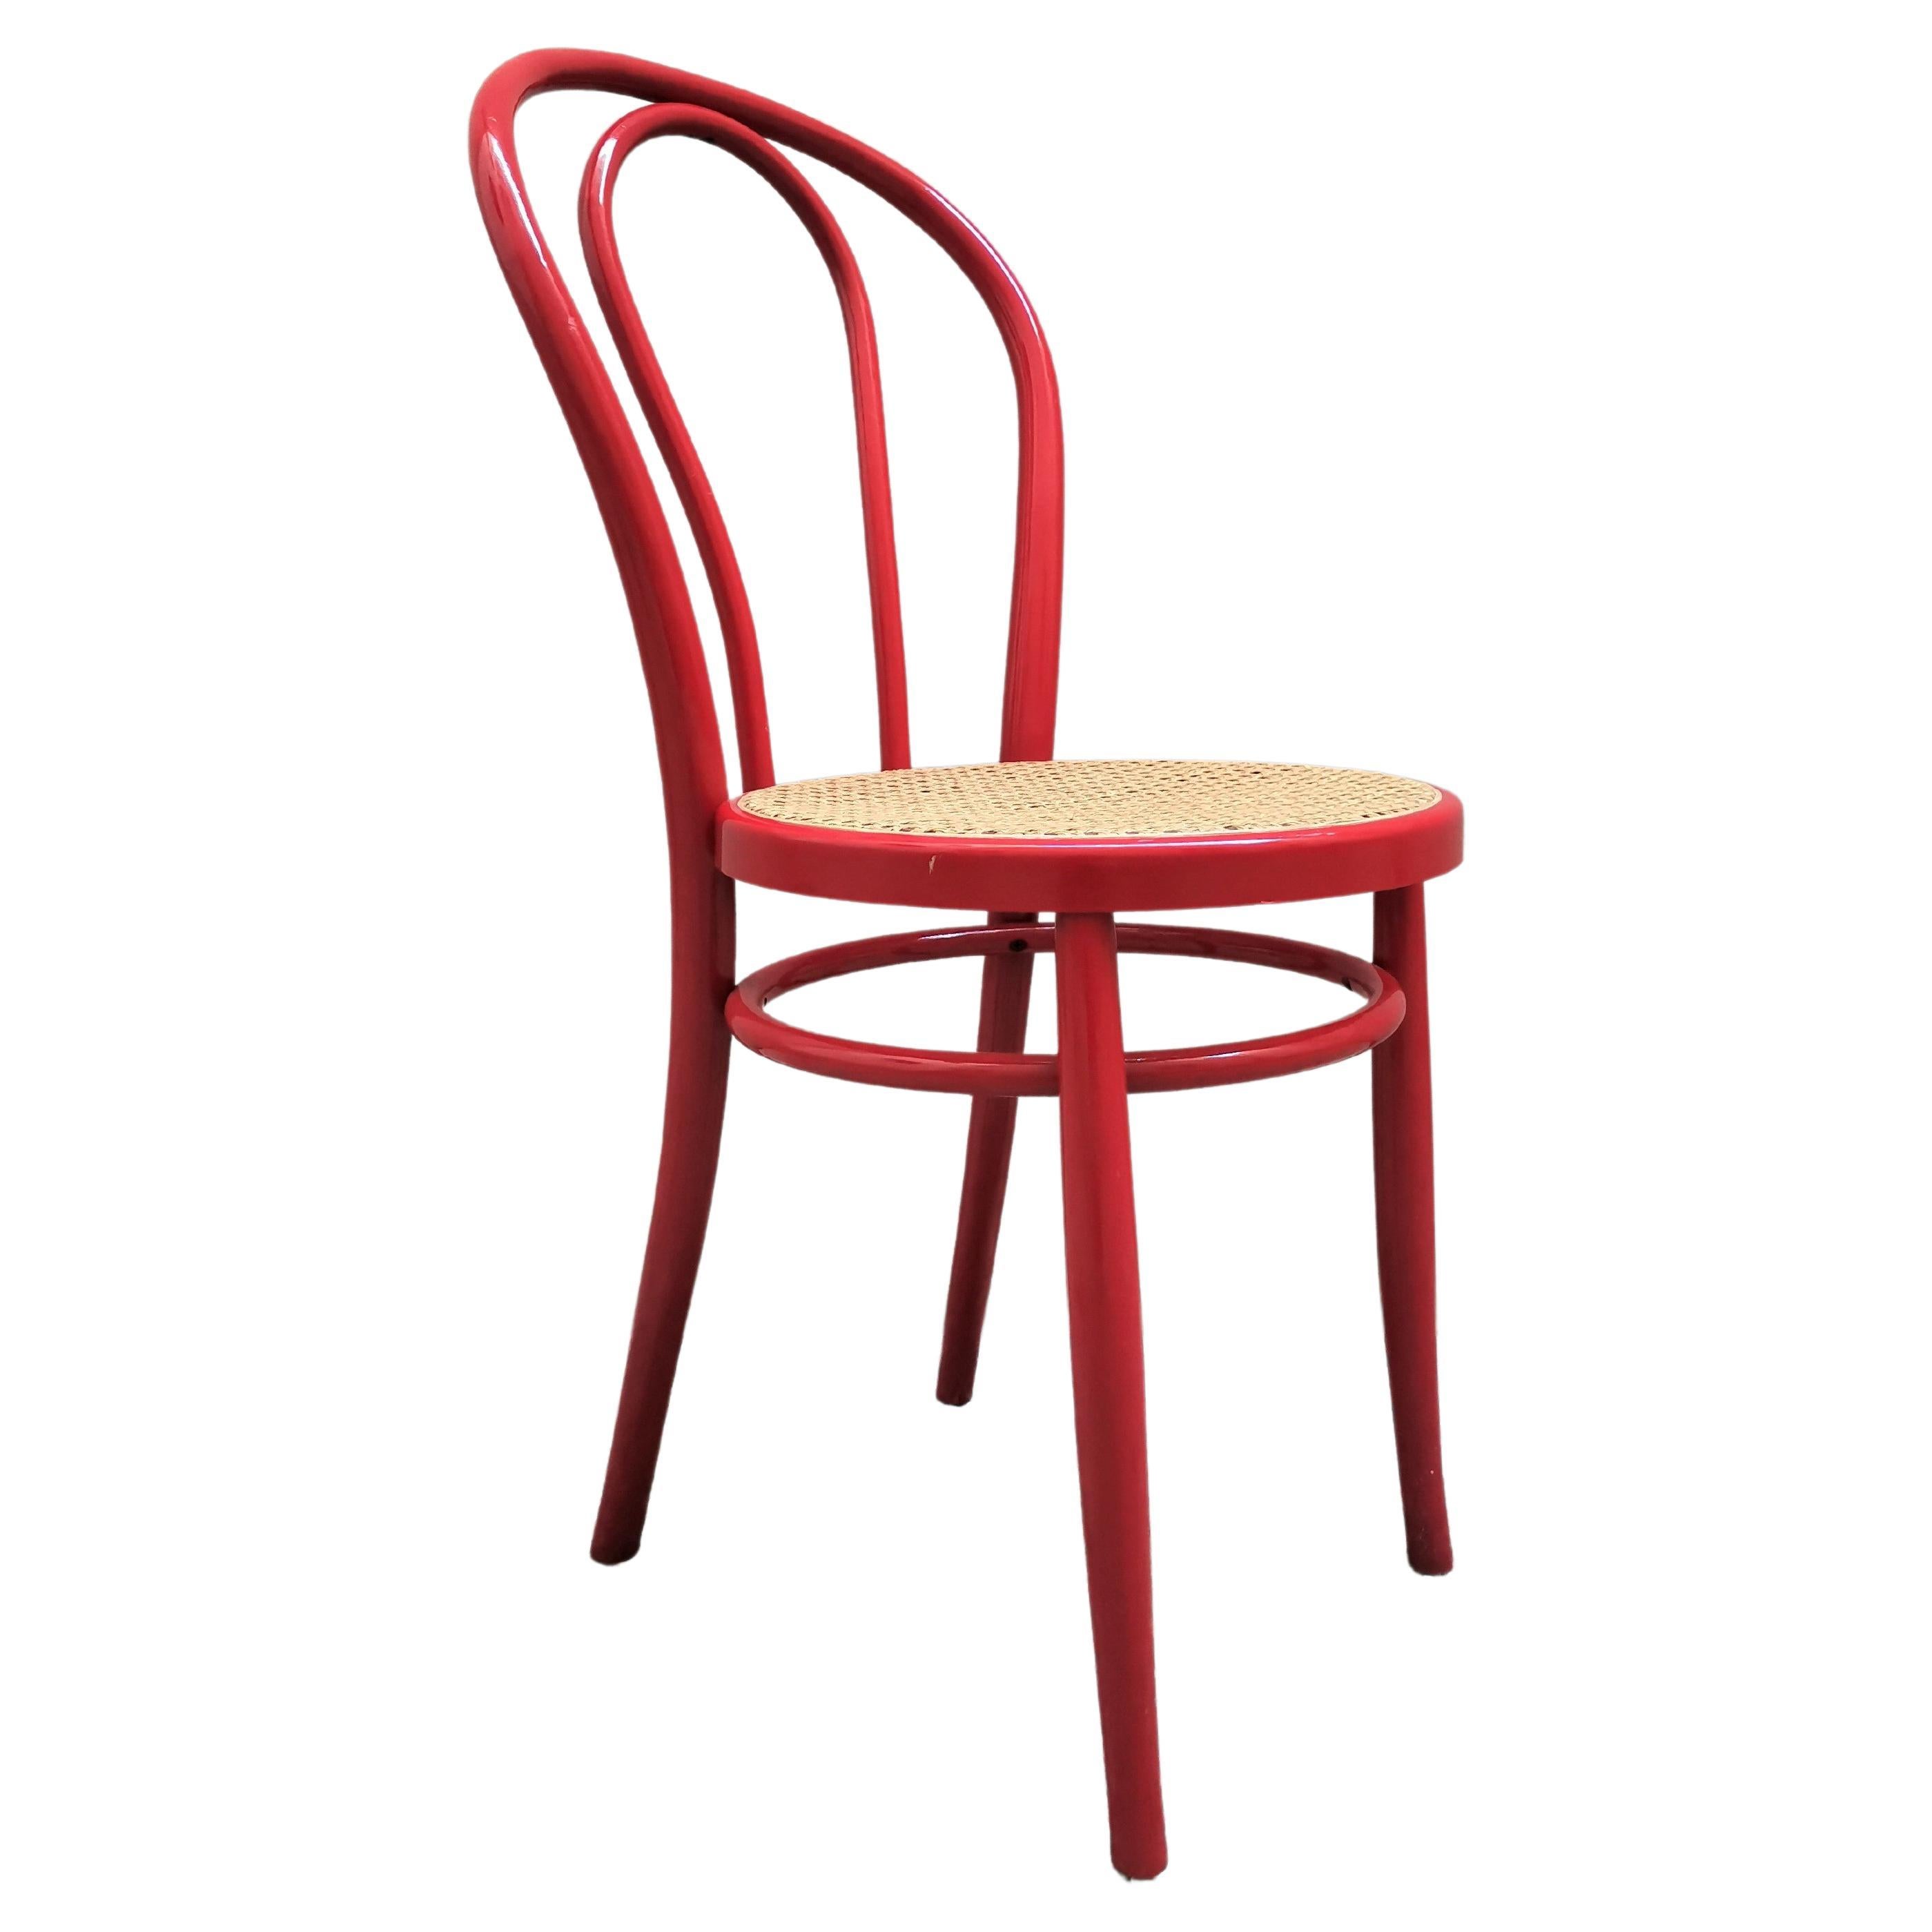 Thonet Style Red Dining Chair, 1980s For Sale